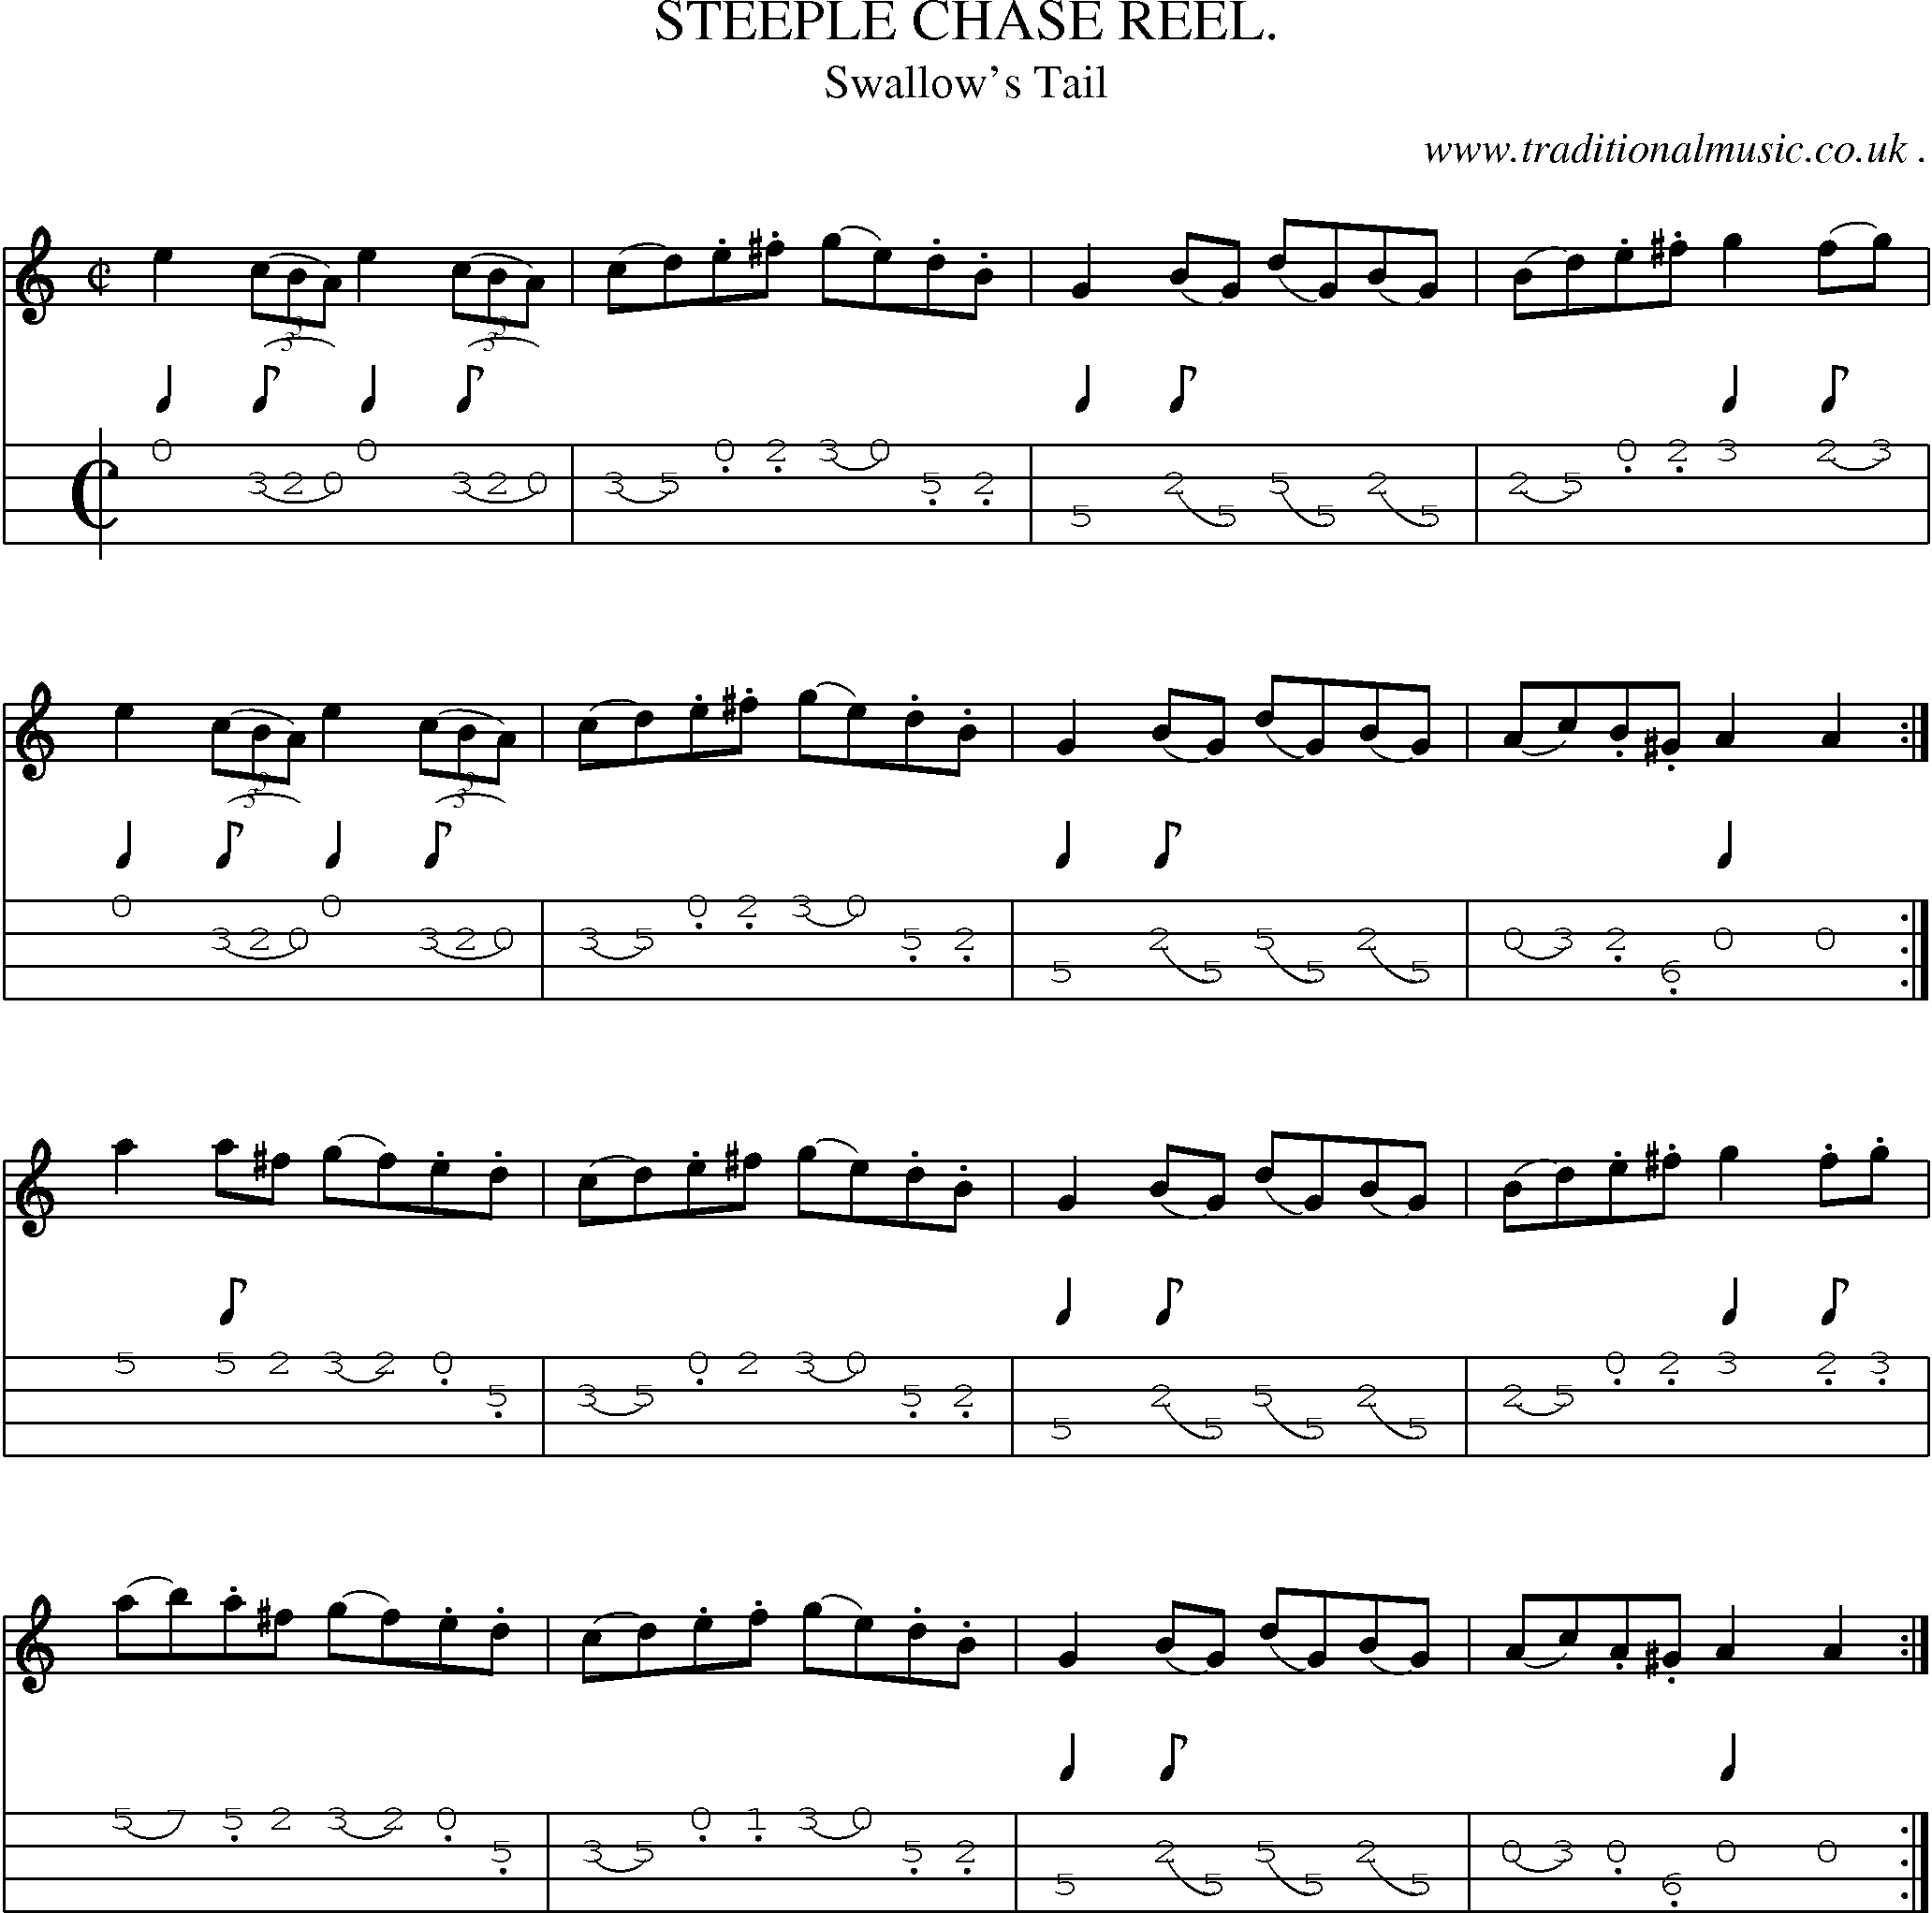 Sheet-Music and Mandolin Tabs for Steeple Chase Reel